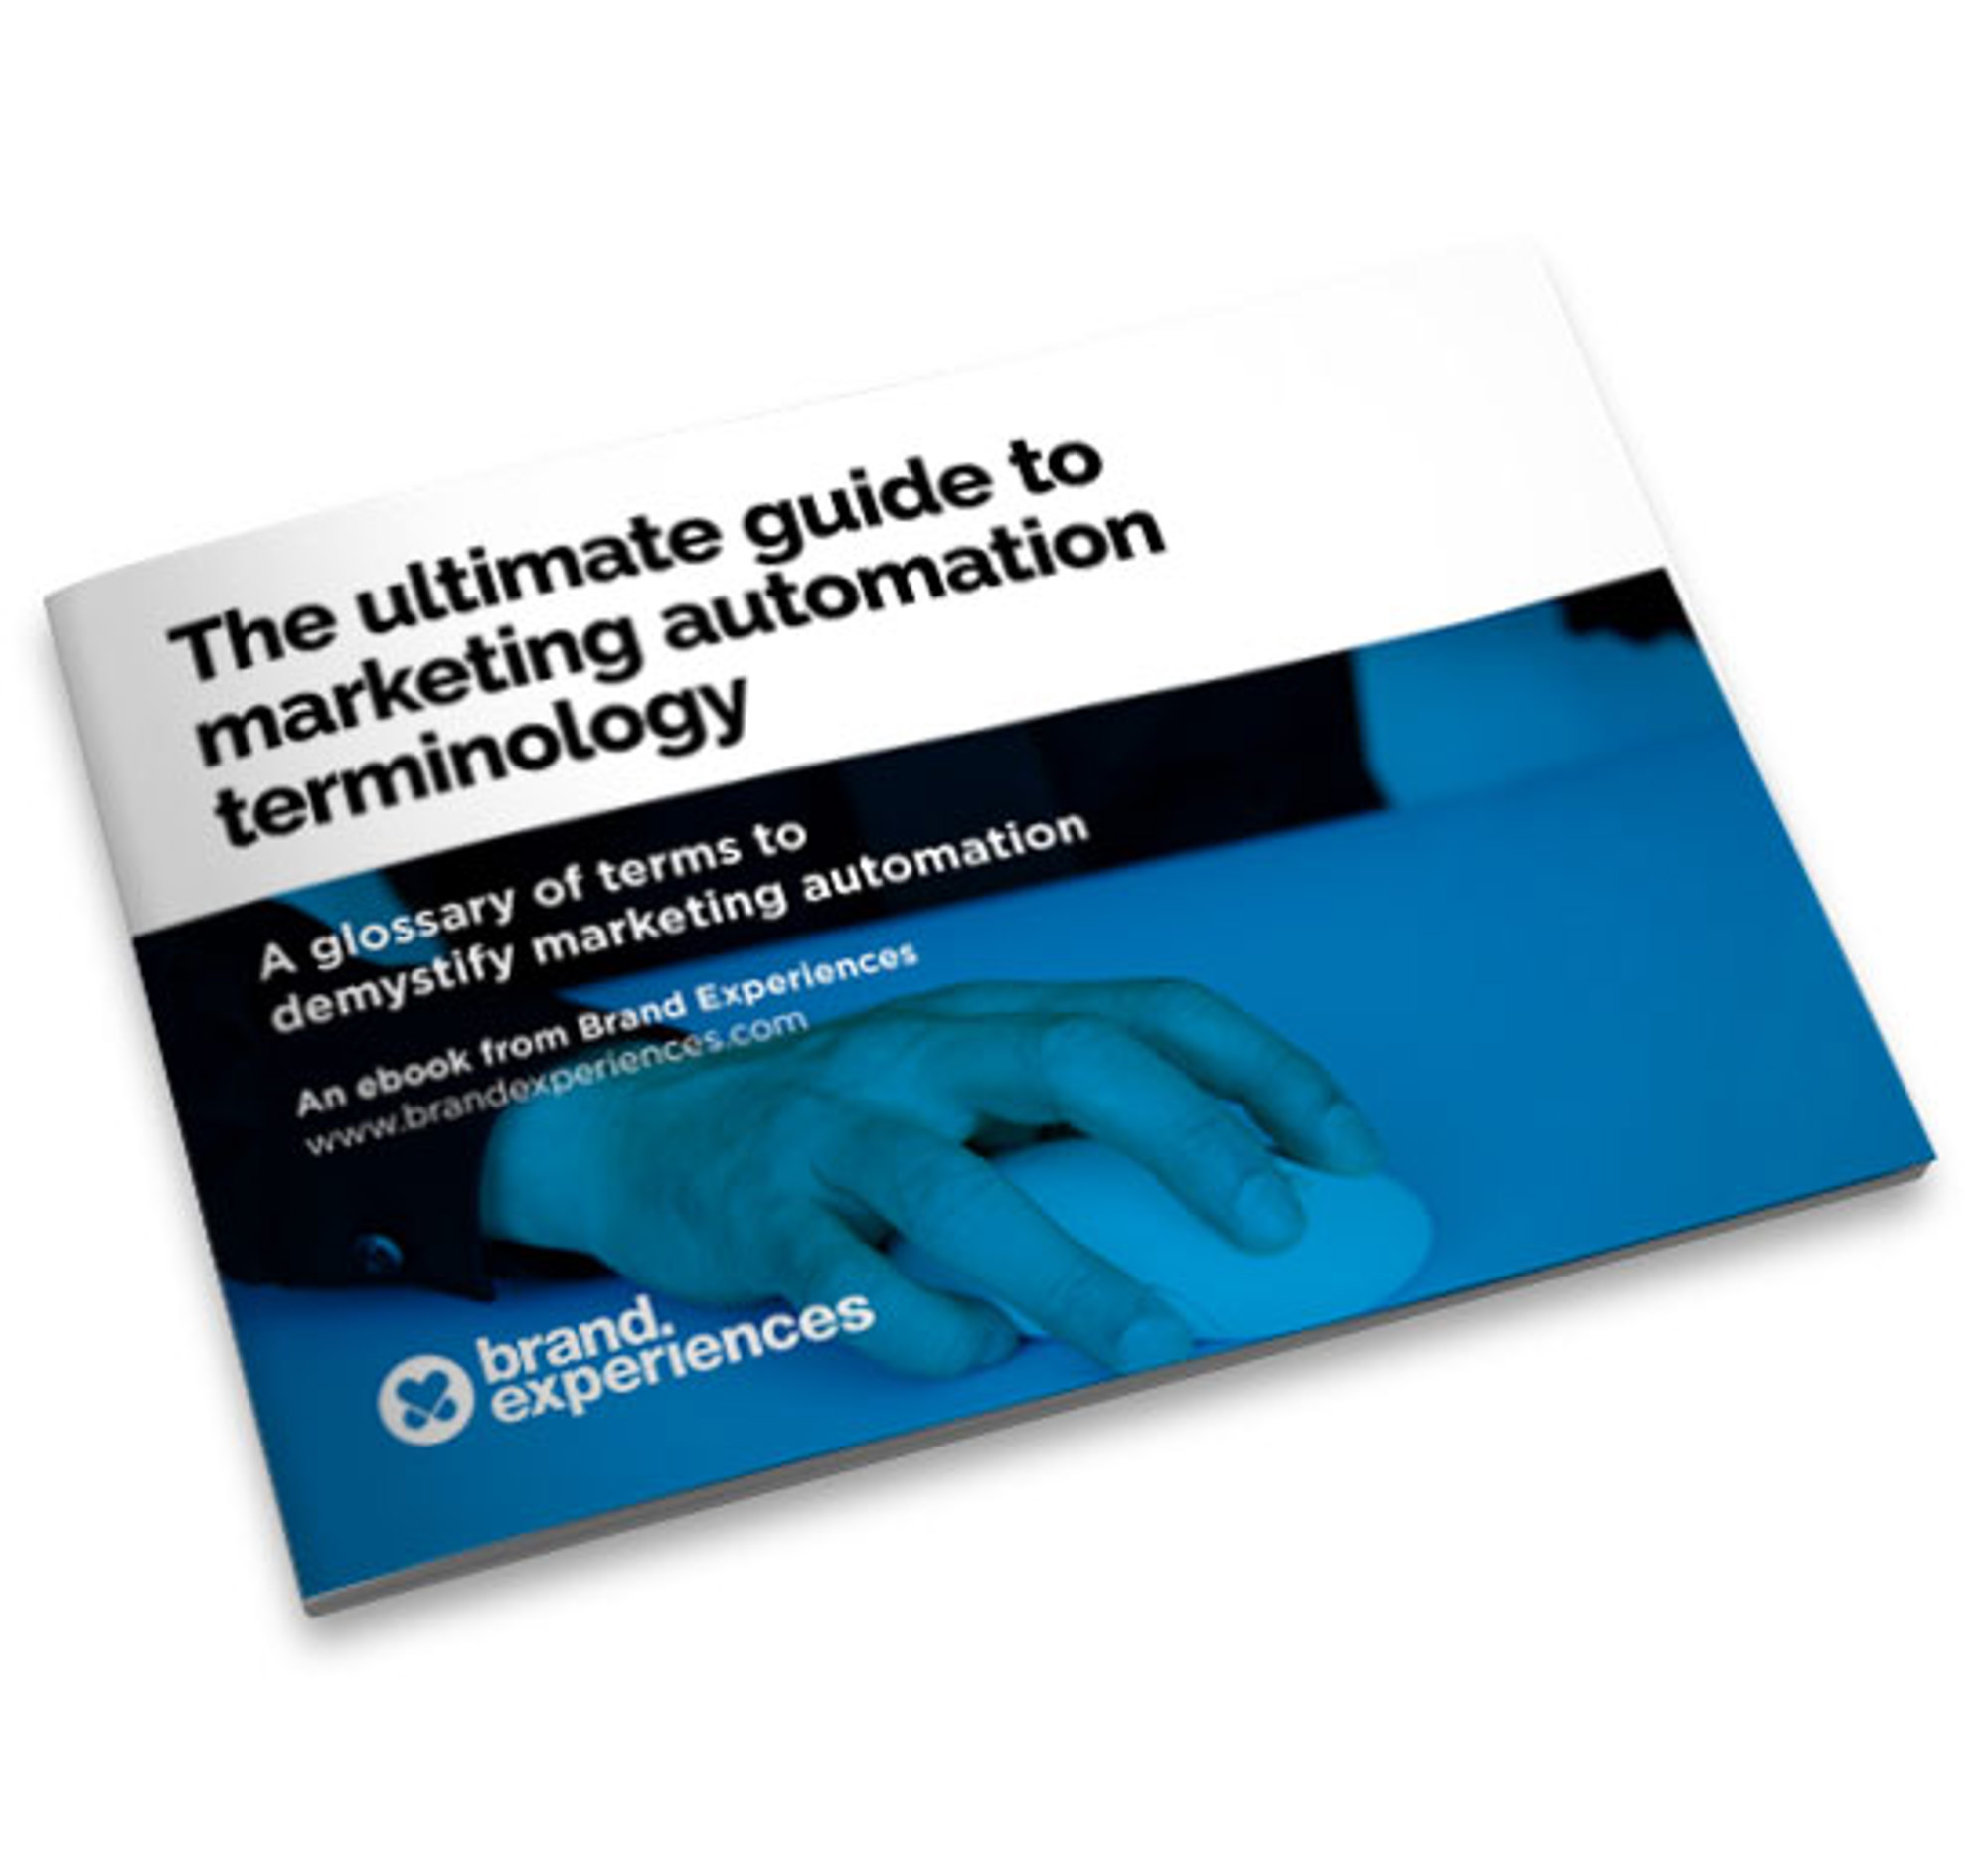 The ultimate guide to marketing automation